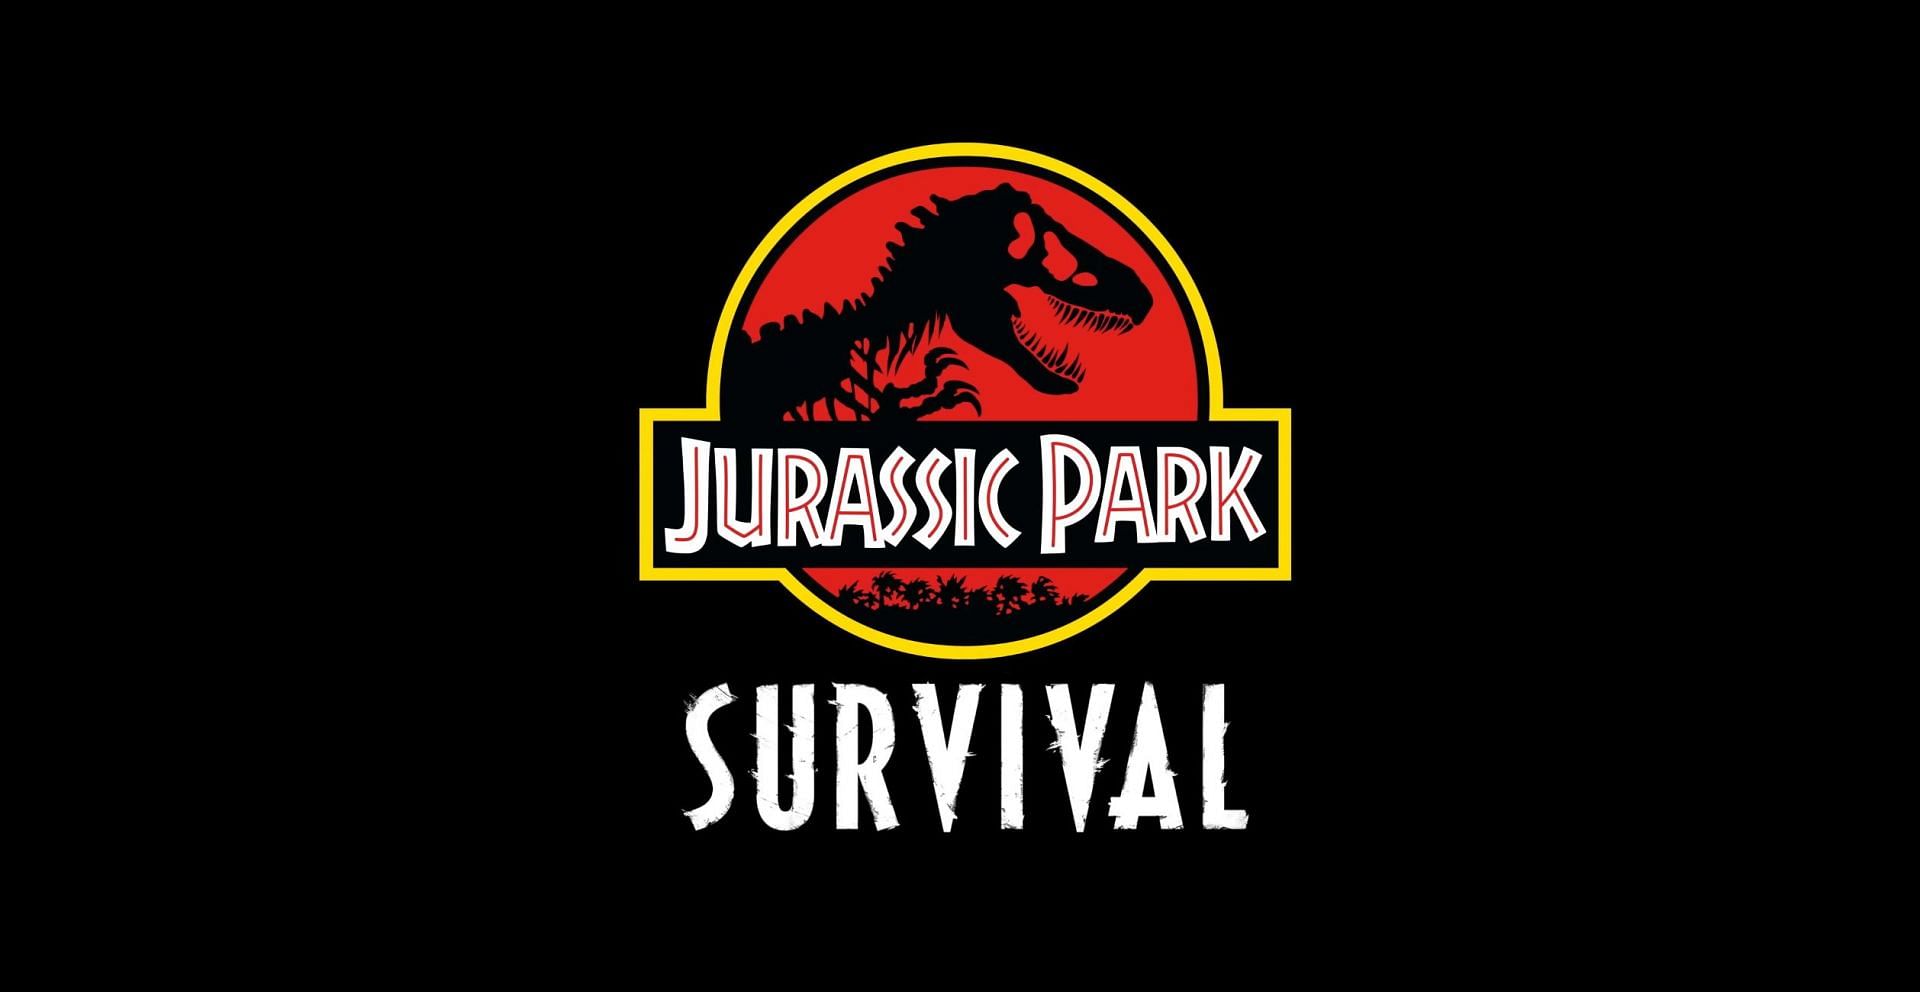 Jurassic Park: Survival was announced at The Game Awards 2023